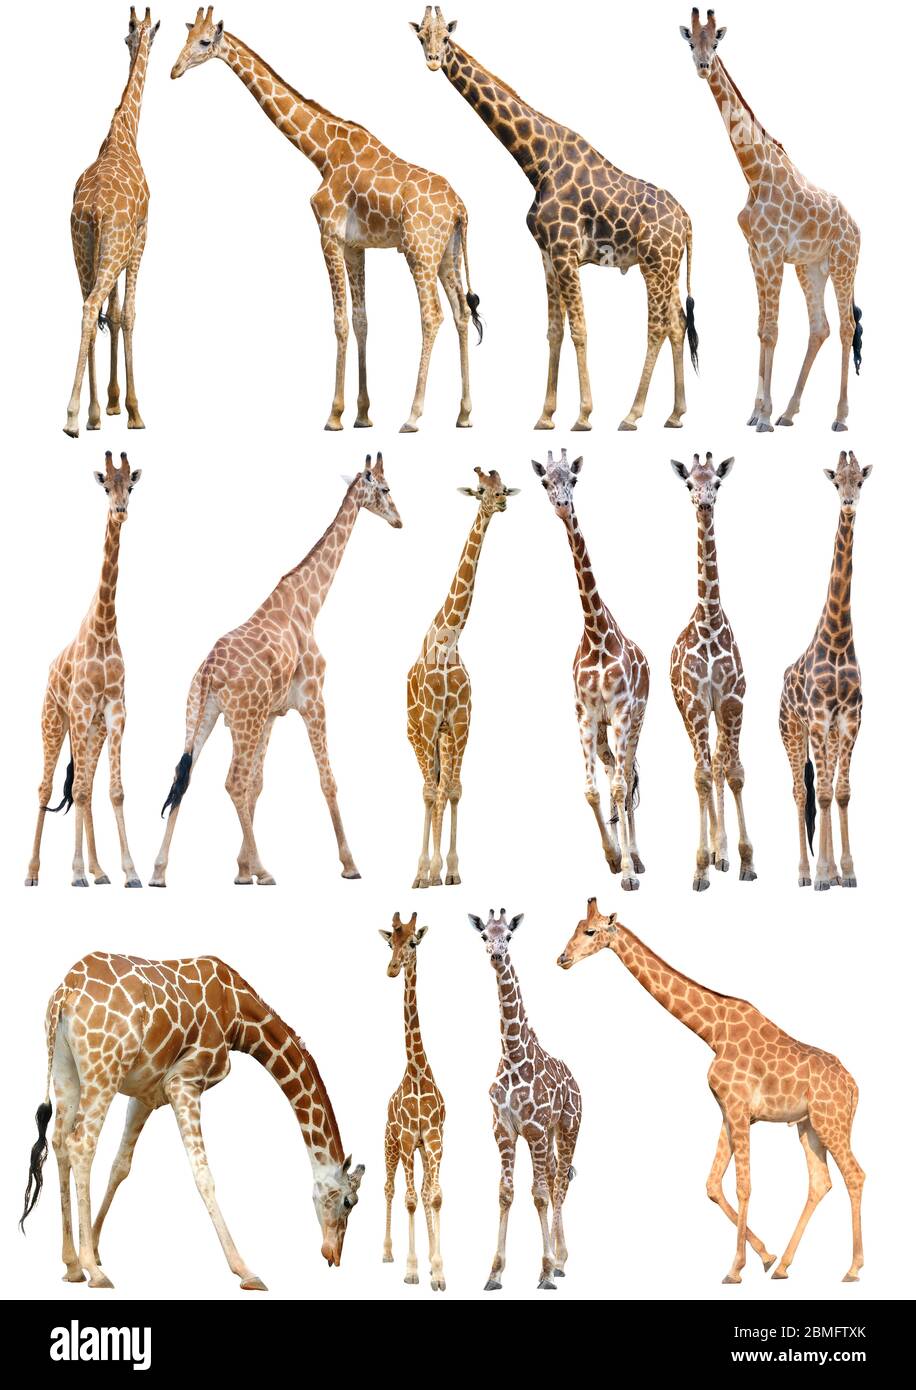 adout and young giraffe isolated on white background Stock Photo